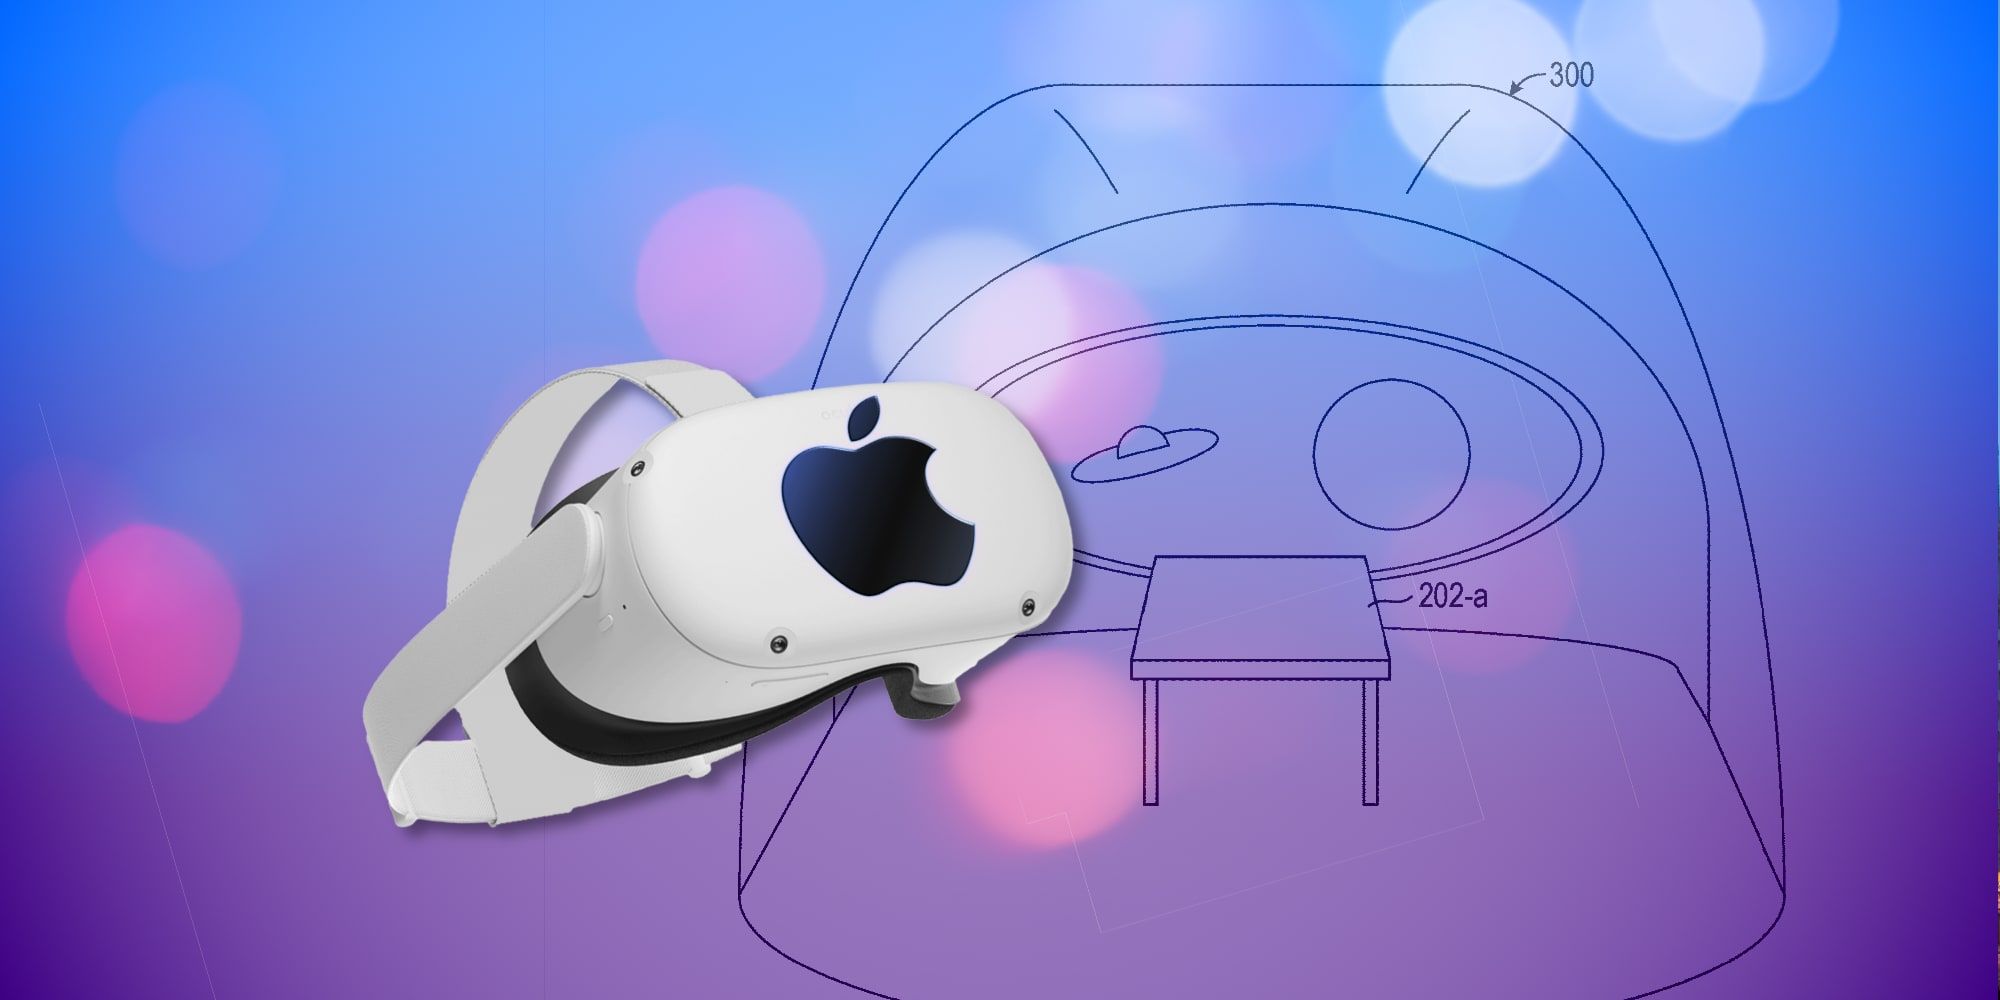 Apple VR Headset Mockup With Patent Image Collision Detetction